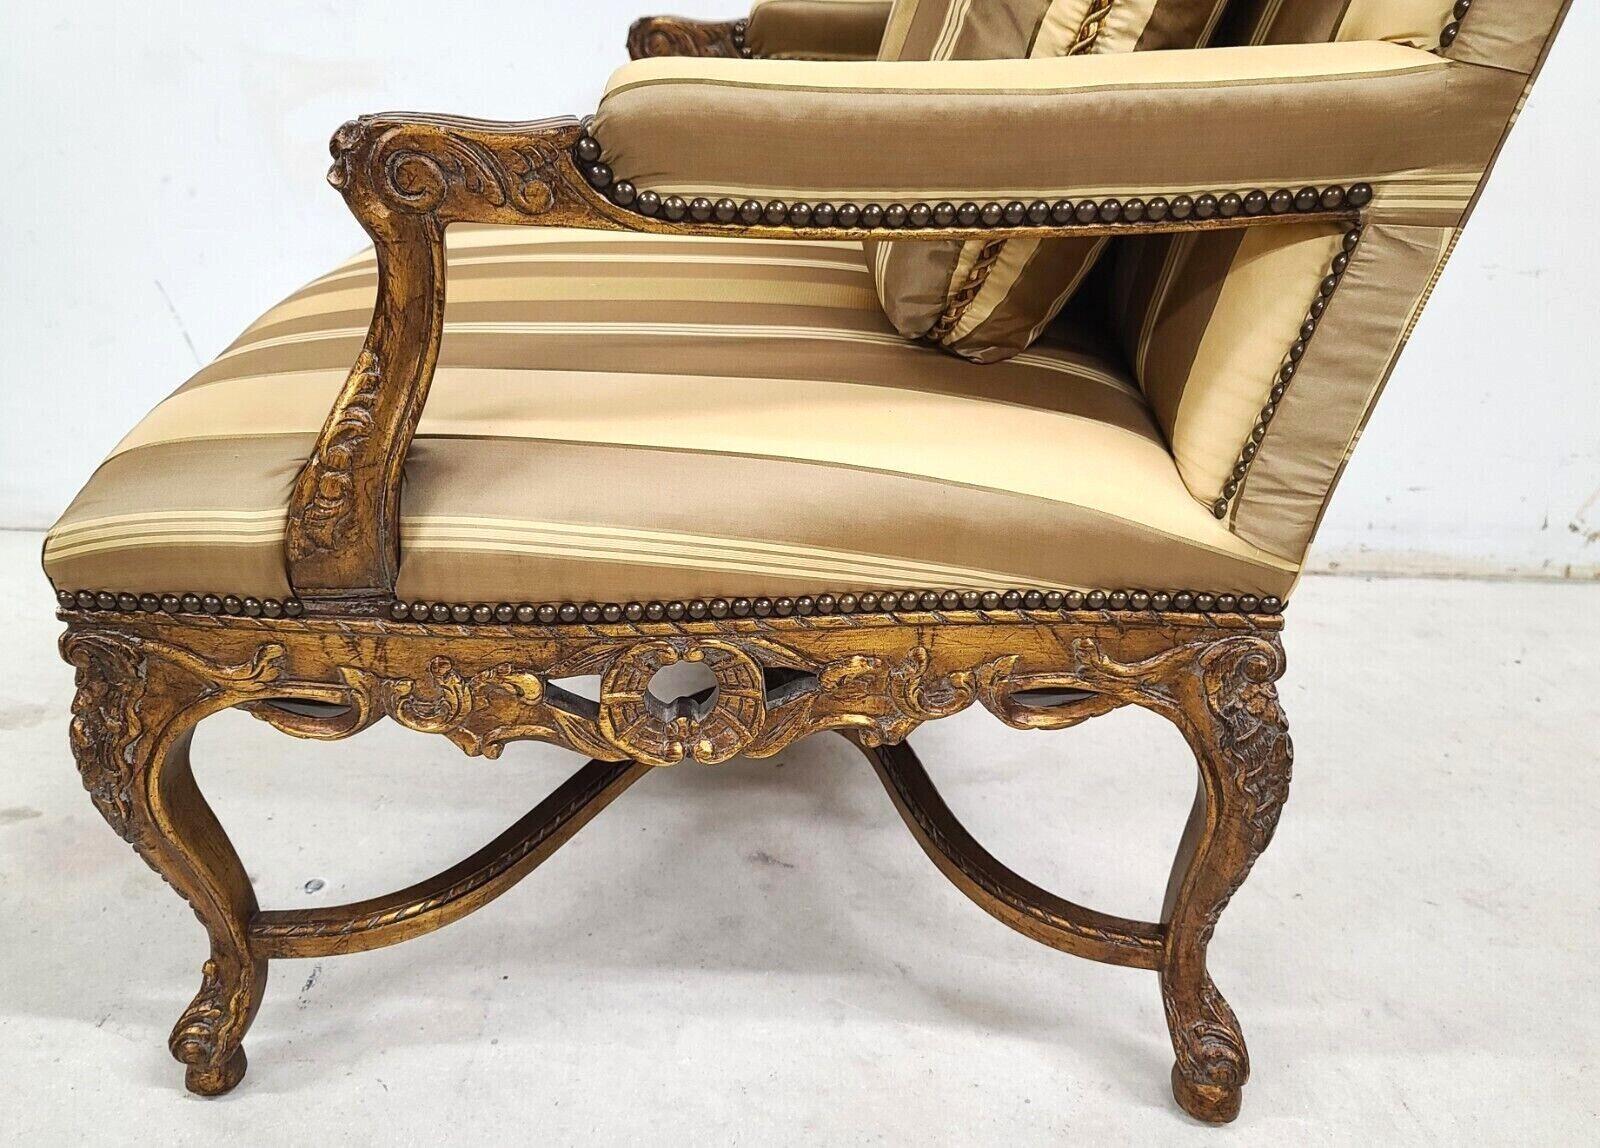 French Provincial Louis XV Giltwood Bergere Armchair by Robb Stucky 1